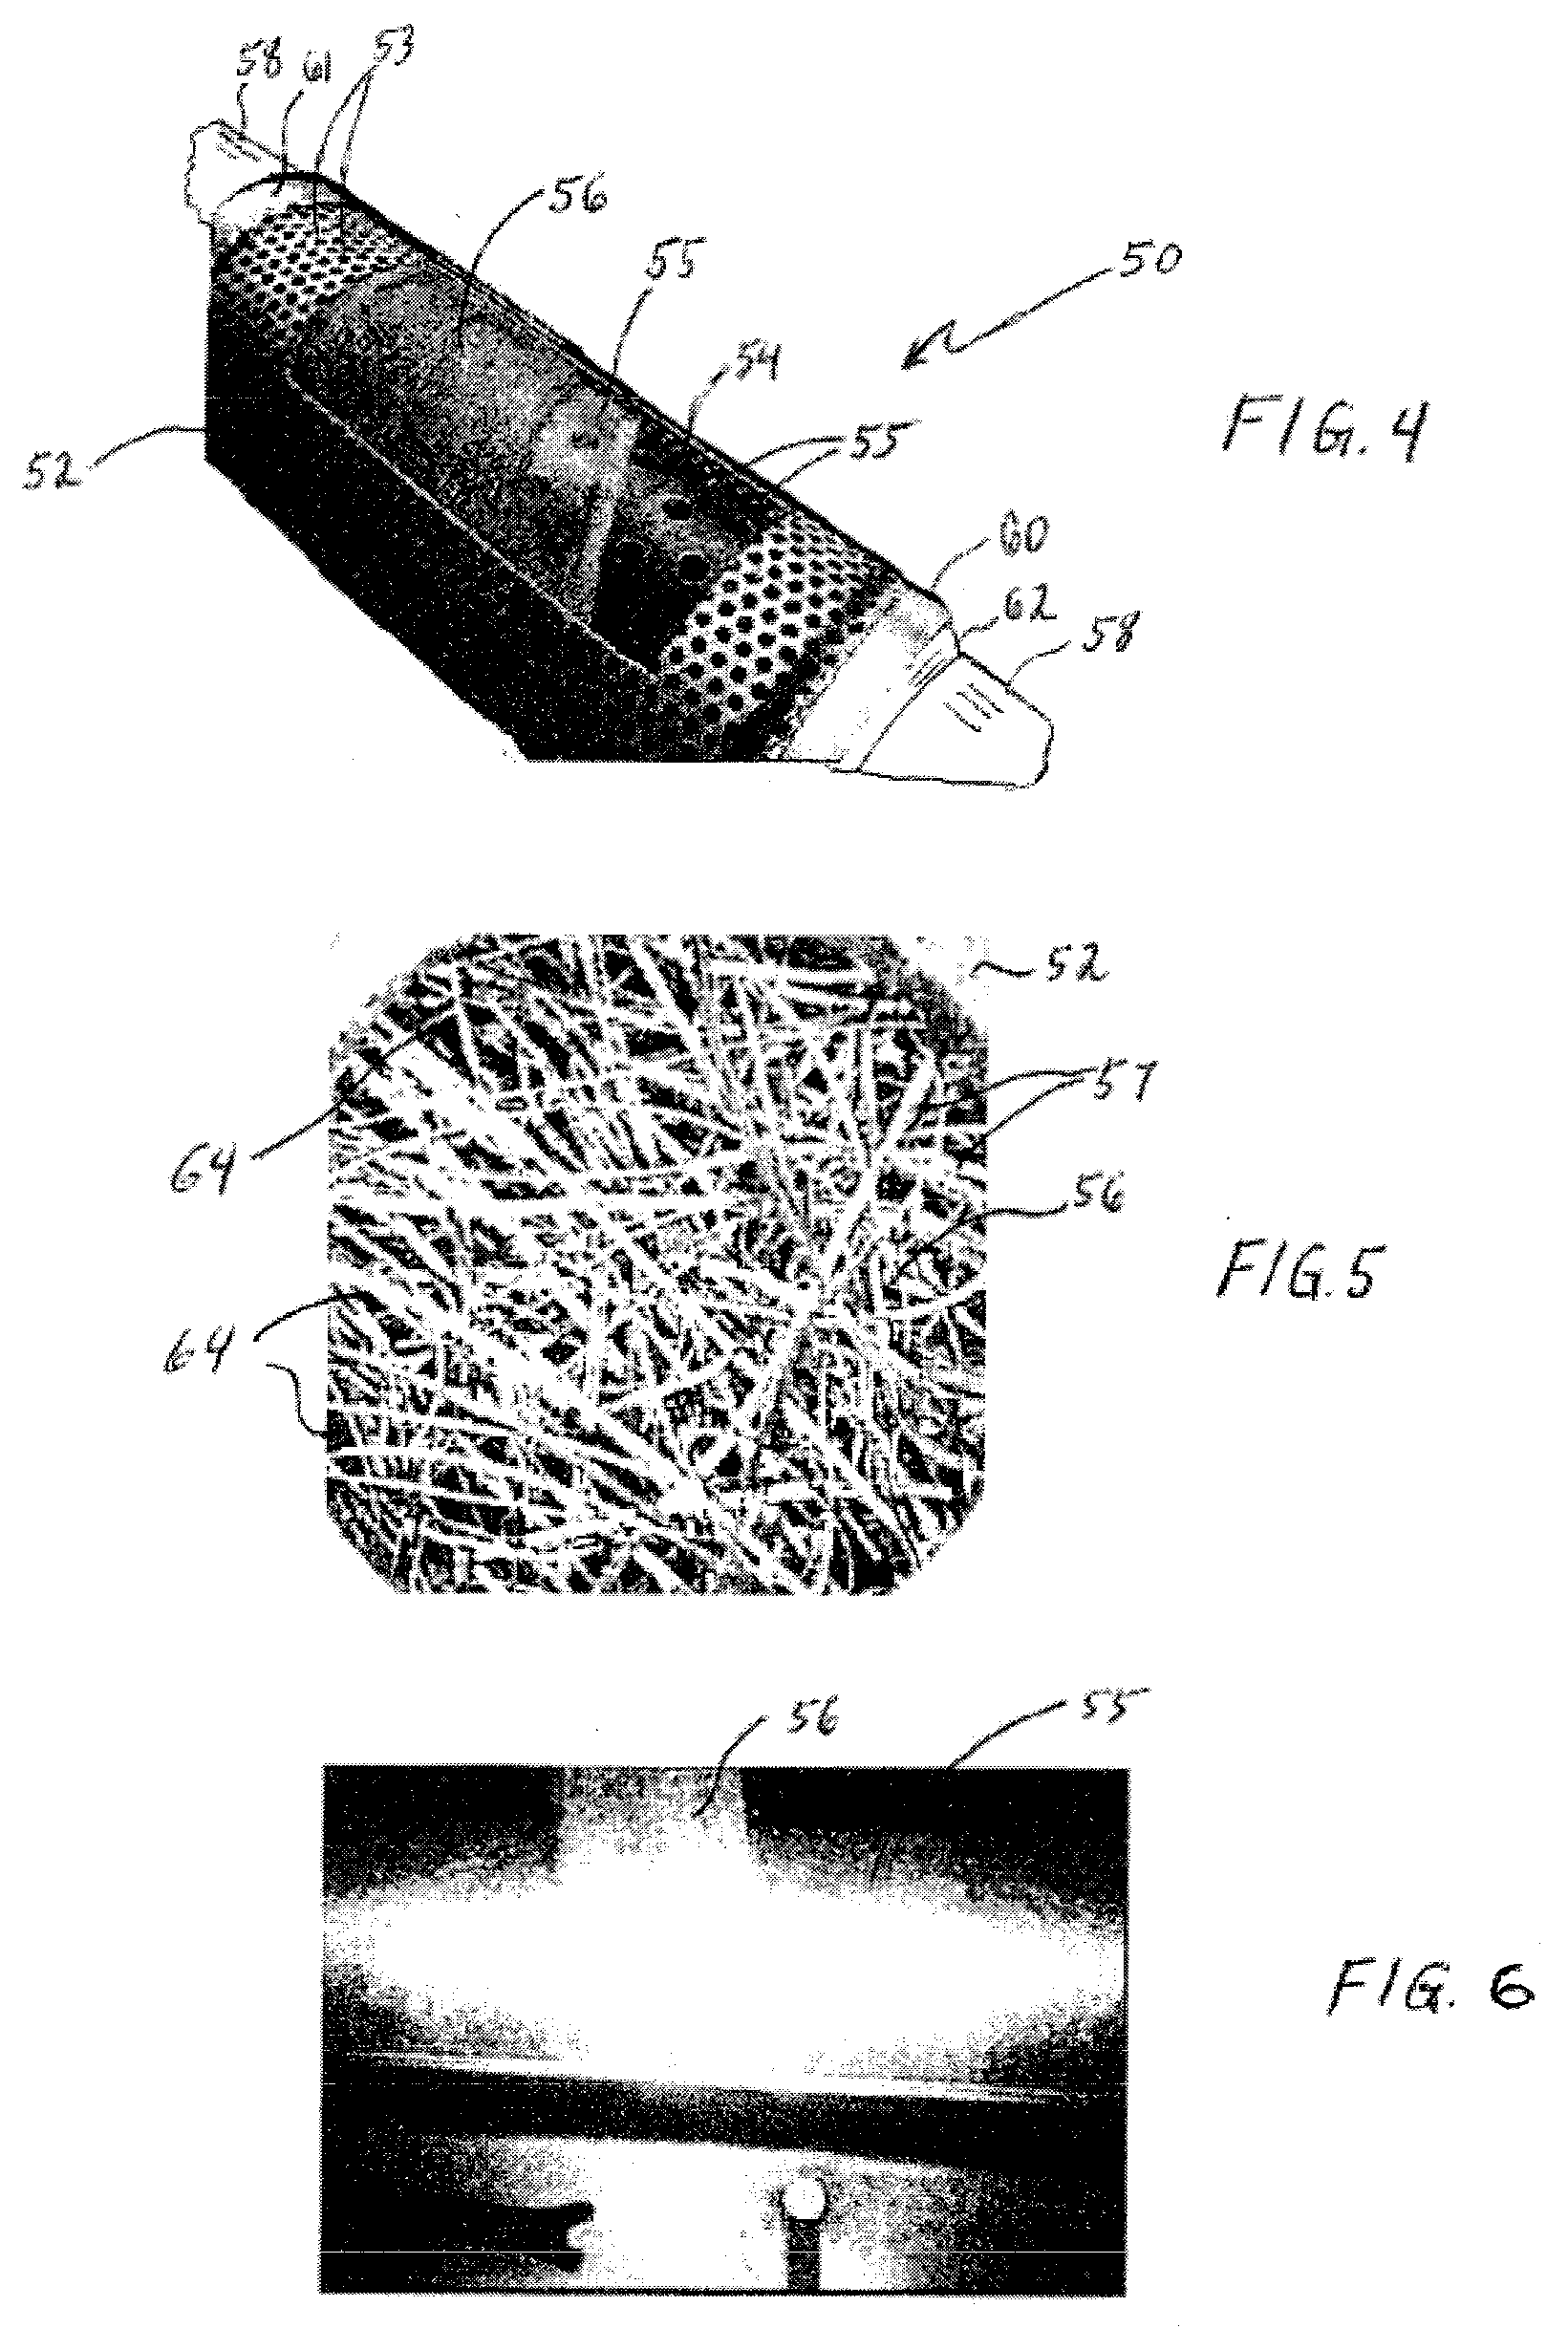 Well Servicing Methods and Systems Employing a Triggerable Filter Medium Sealing Composition